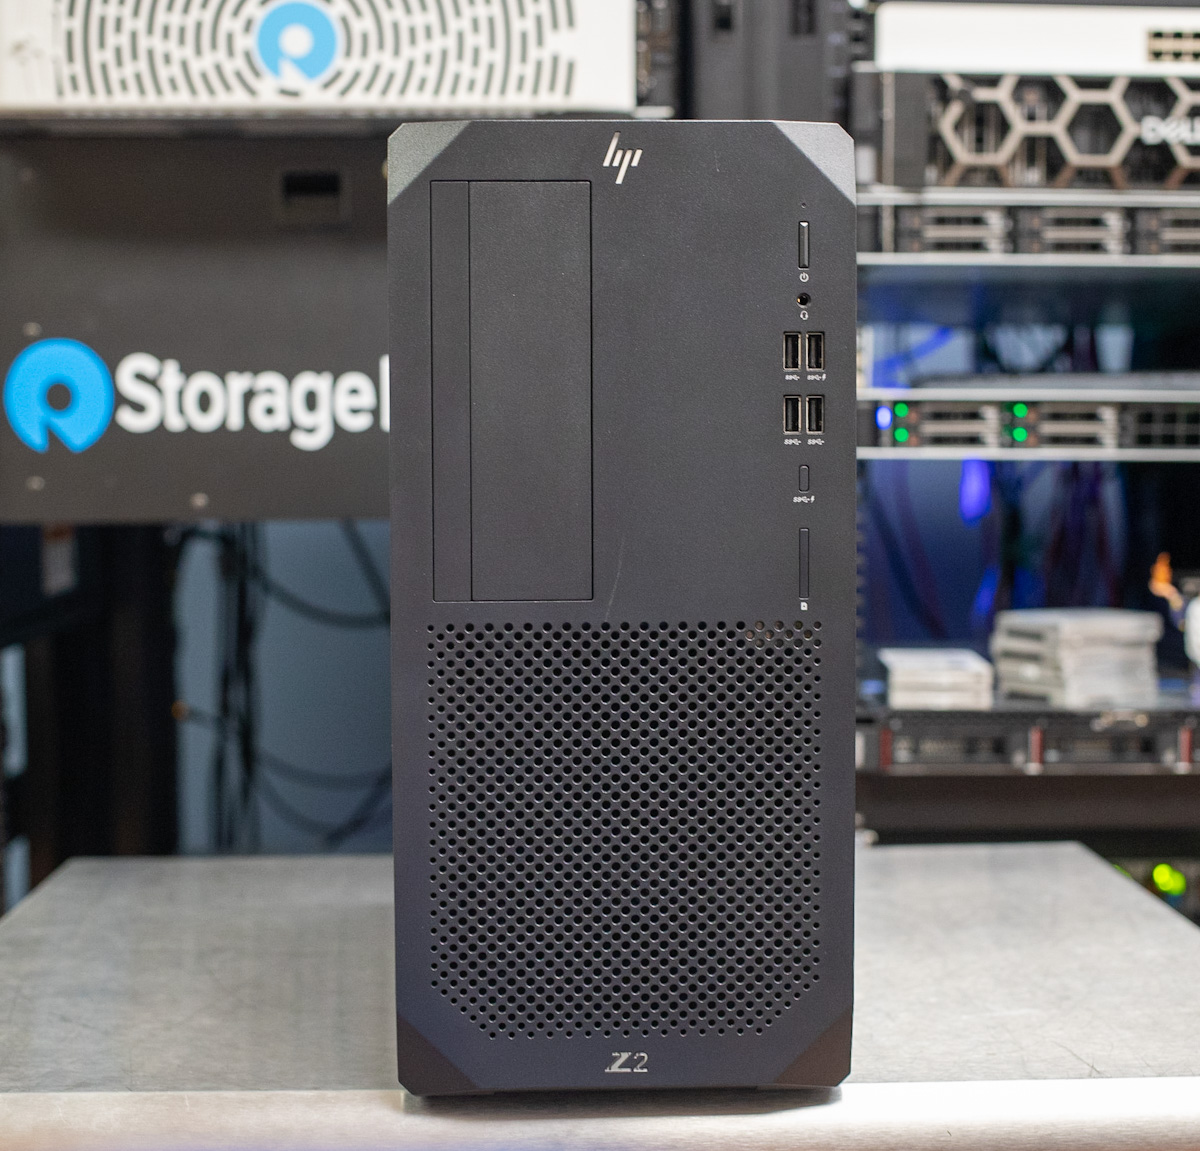 HP Z2 Tower G9 Review - StorageReview.com